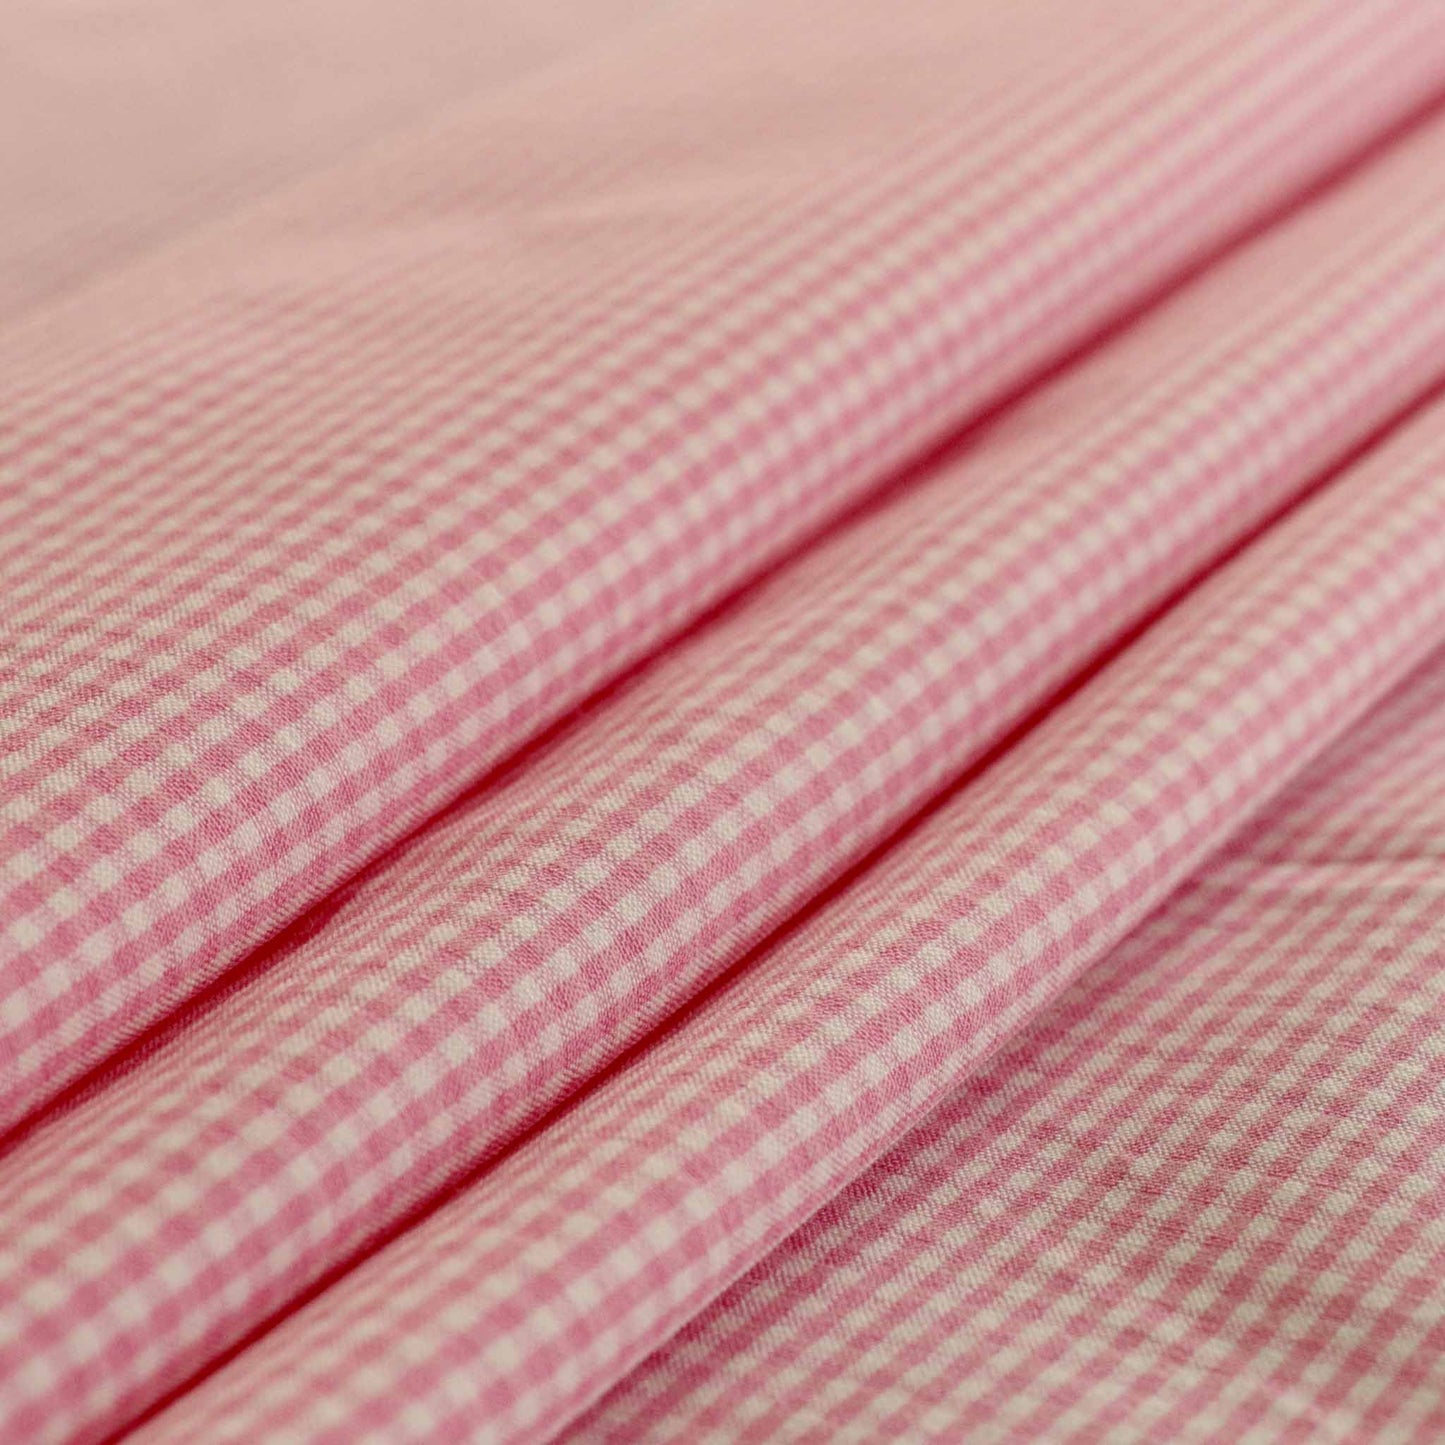 folded bengaline suiting pink and white dressmaking fabric with gingham check design